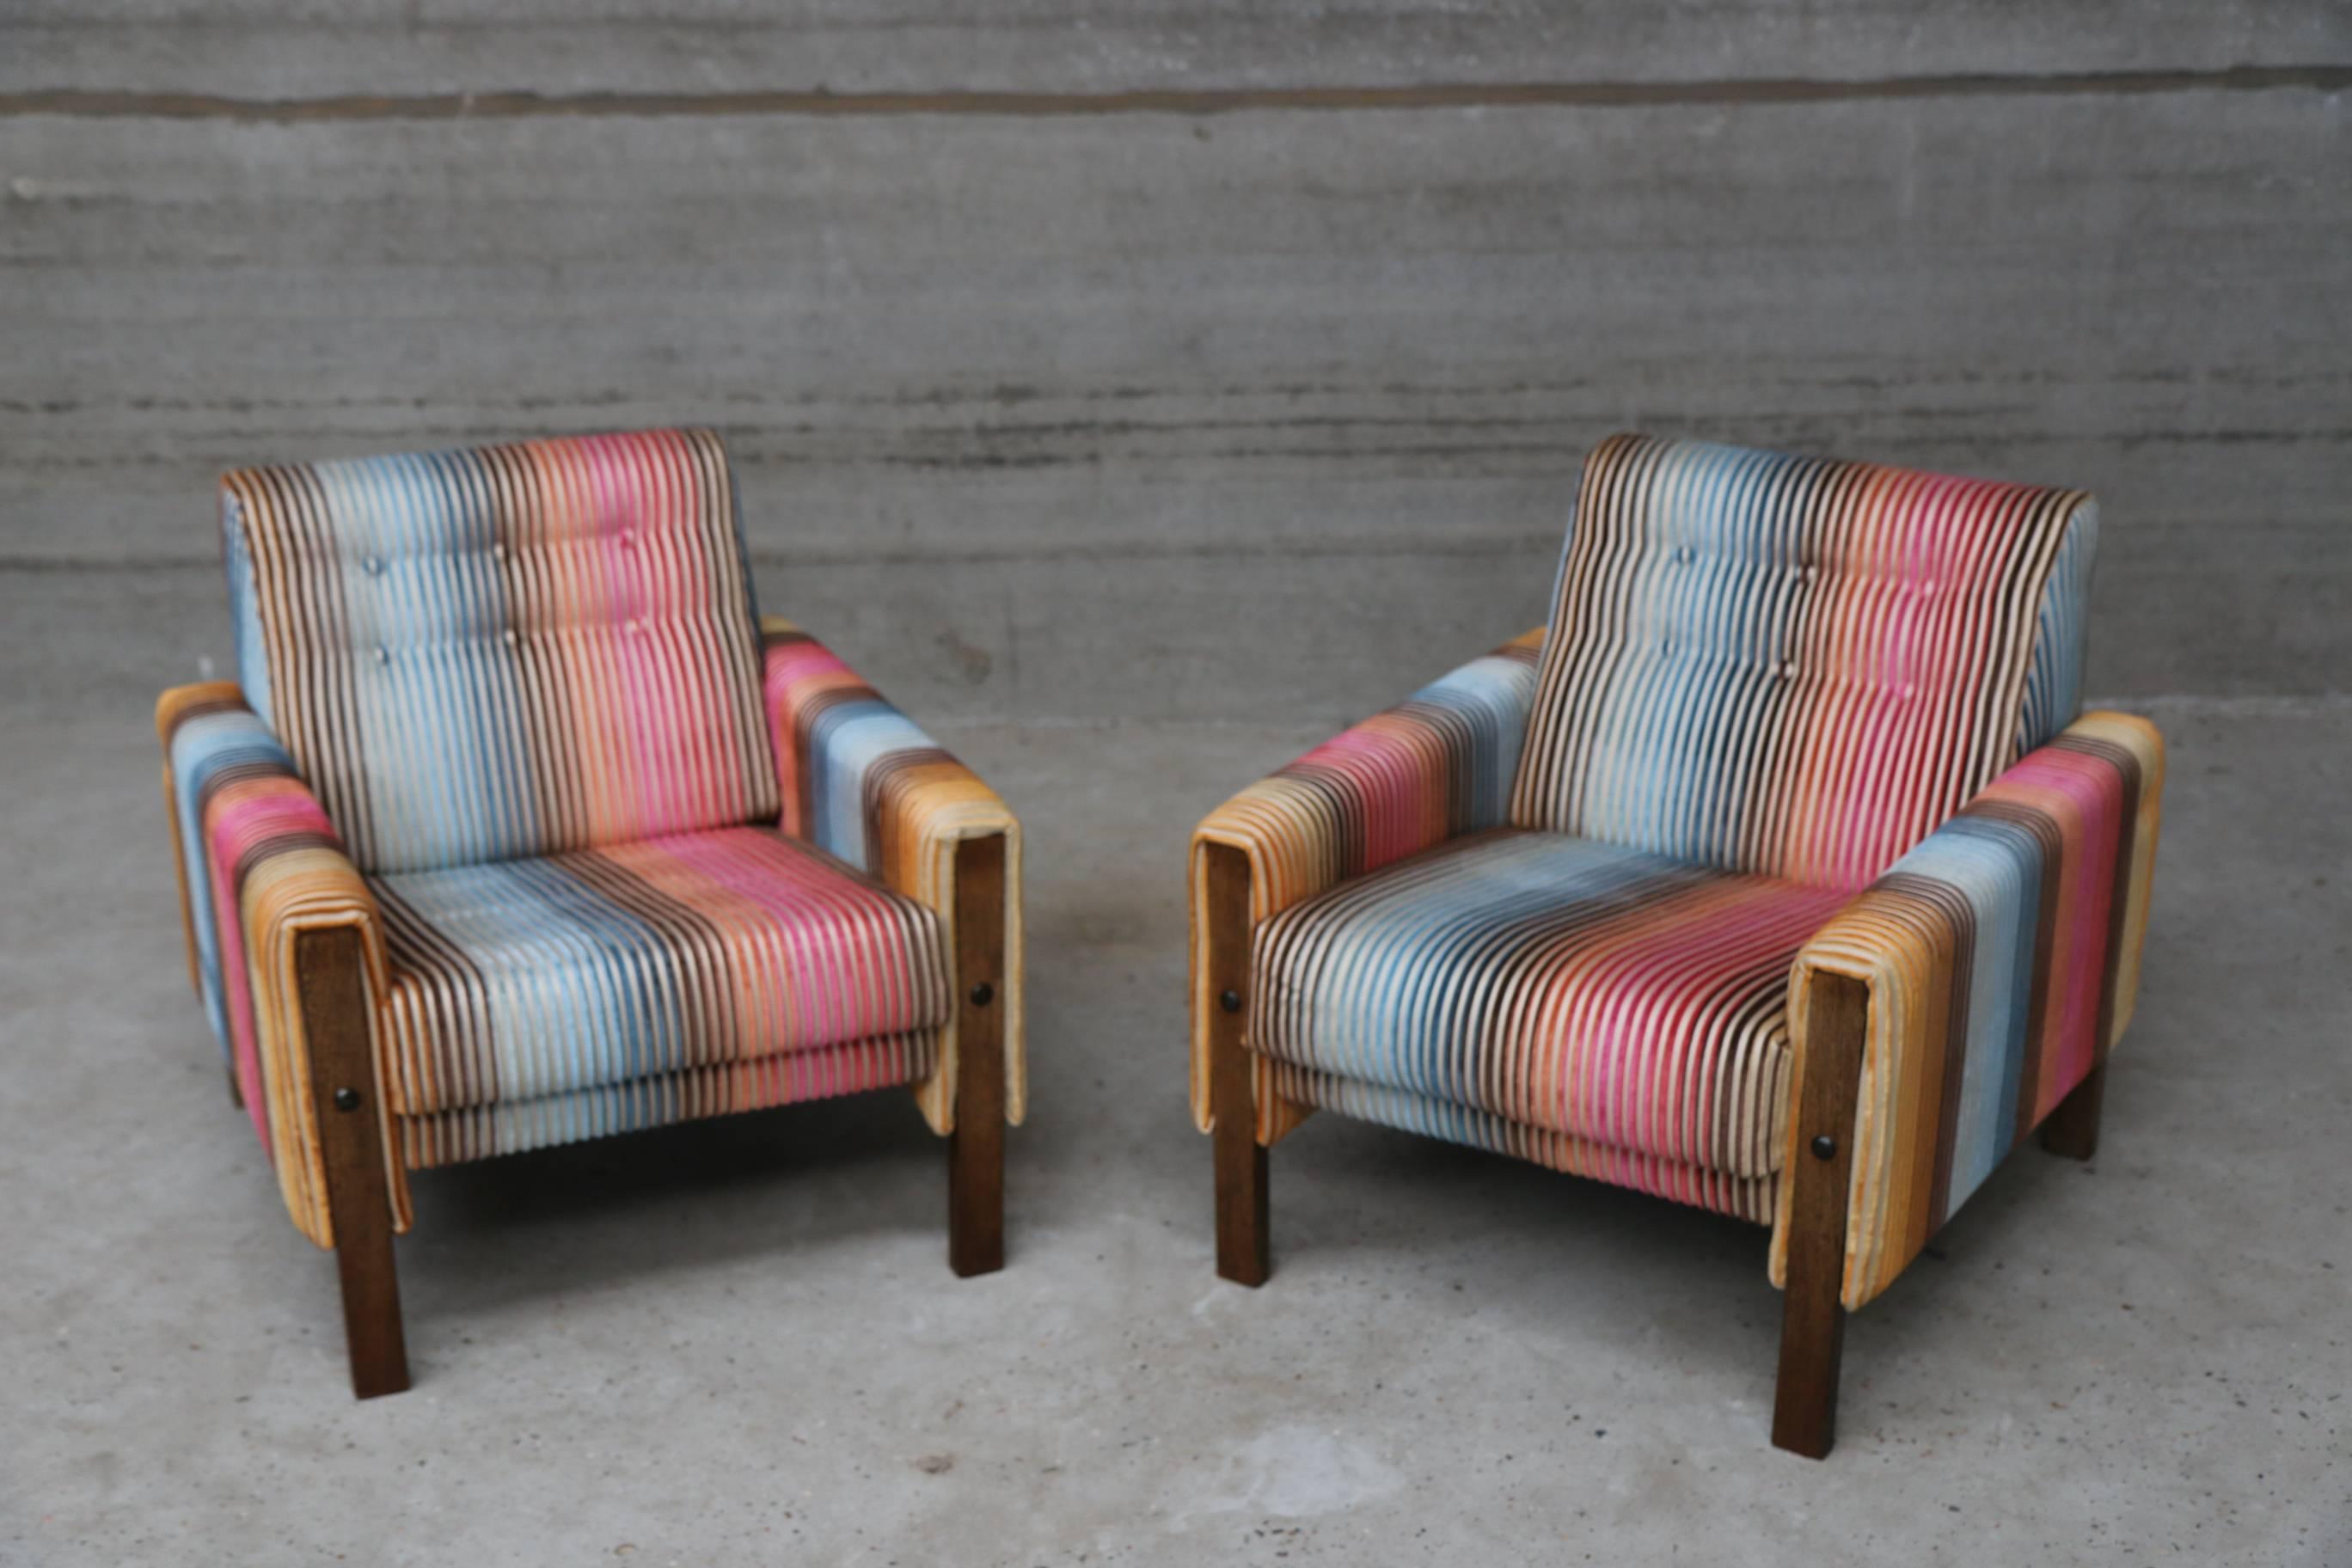 European 1950s Lounge Armchairs Re-Upholstered in Multicolored Missoni Fabric